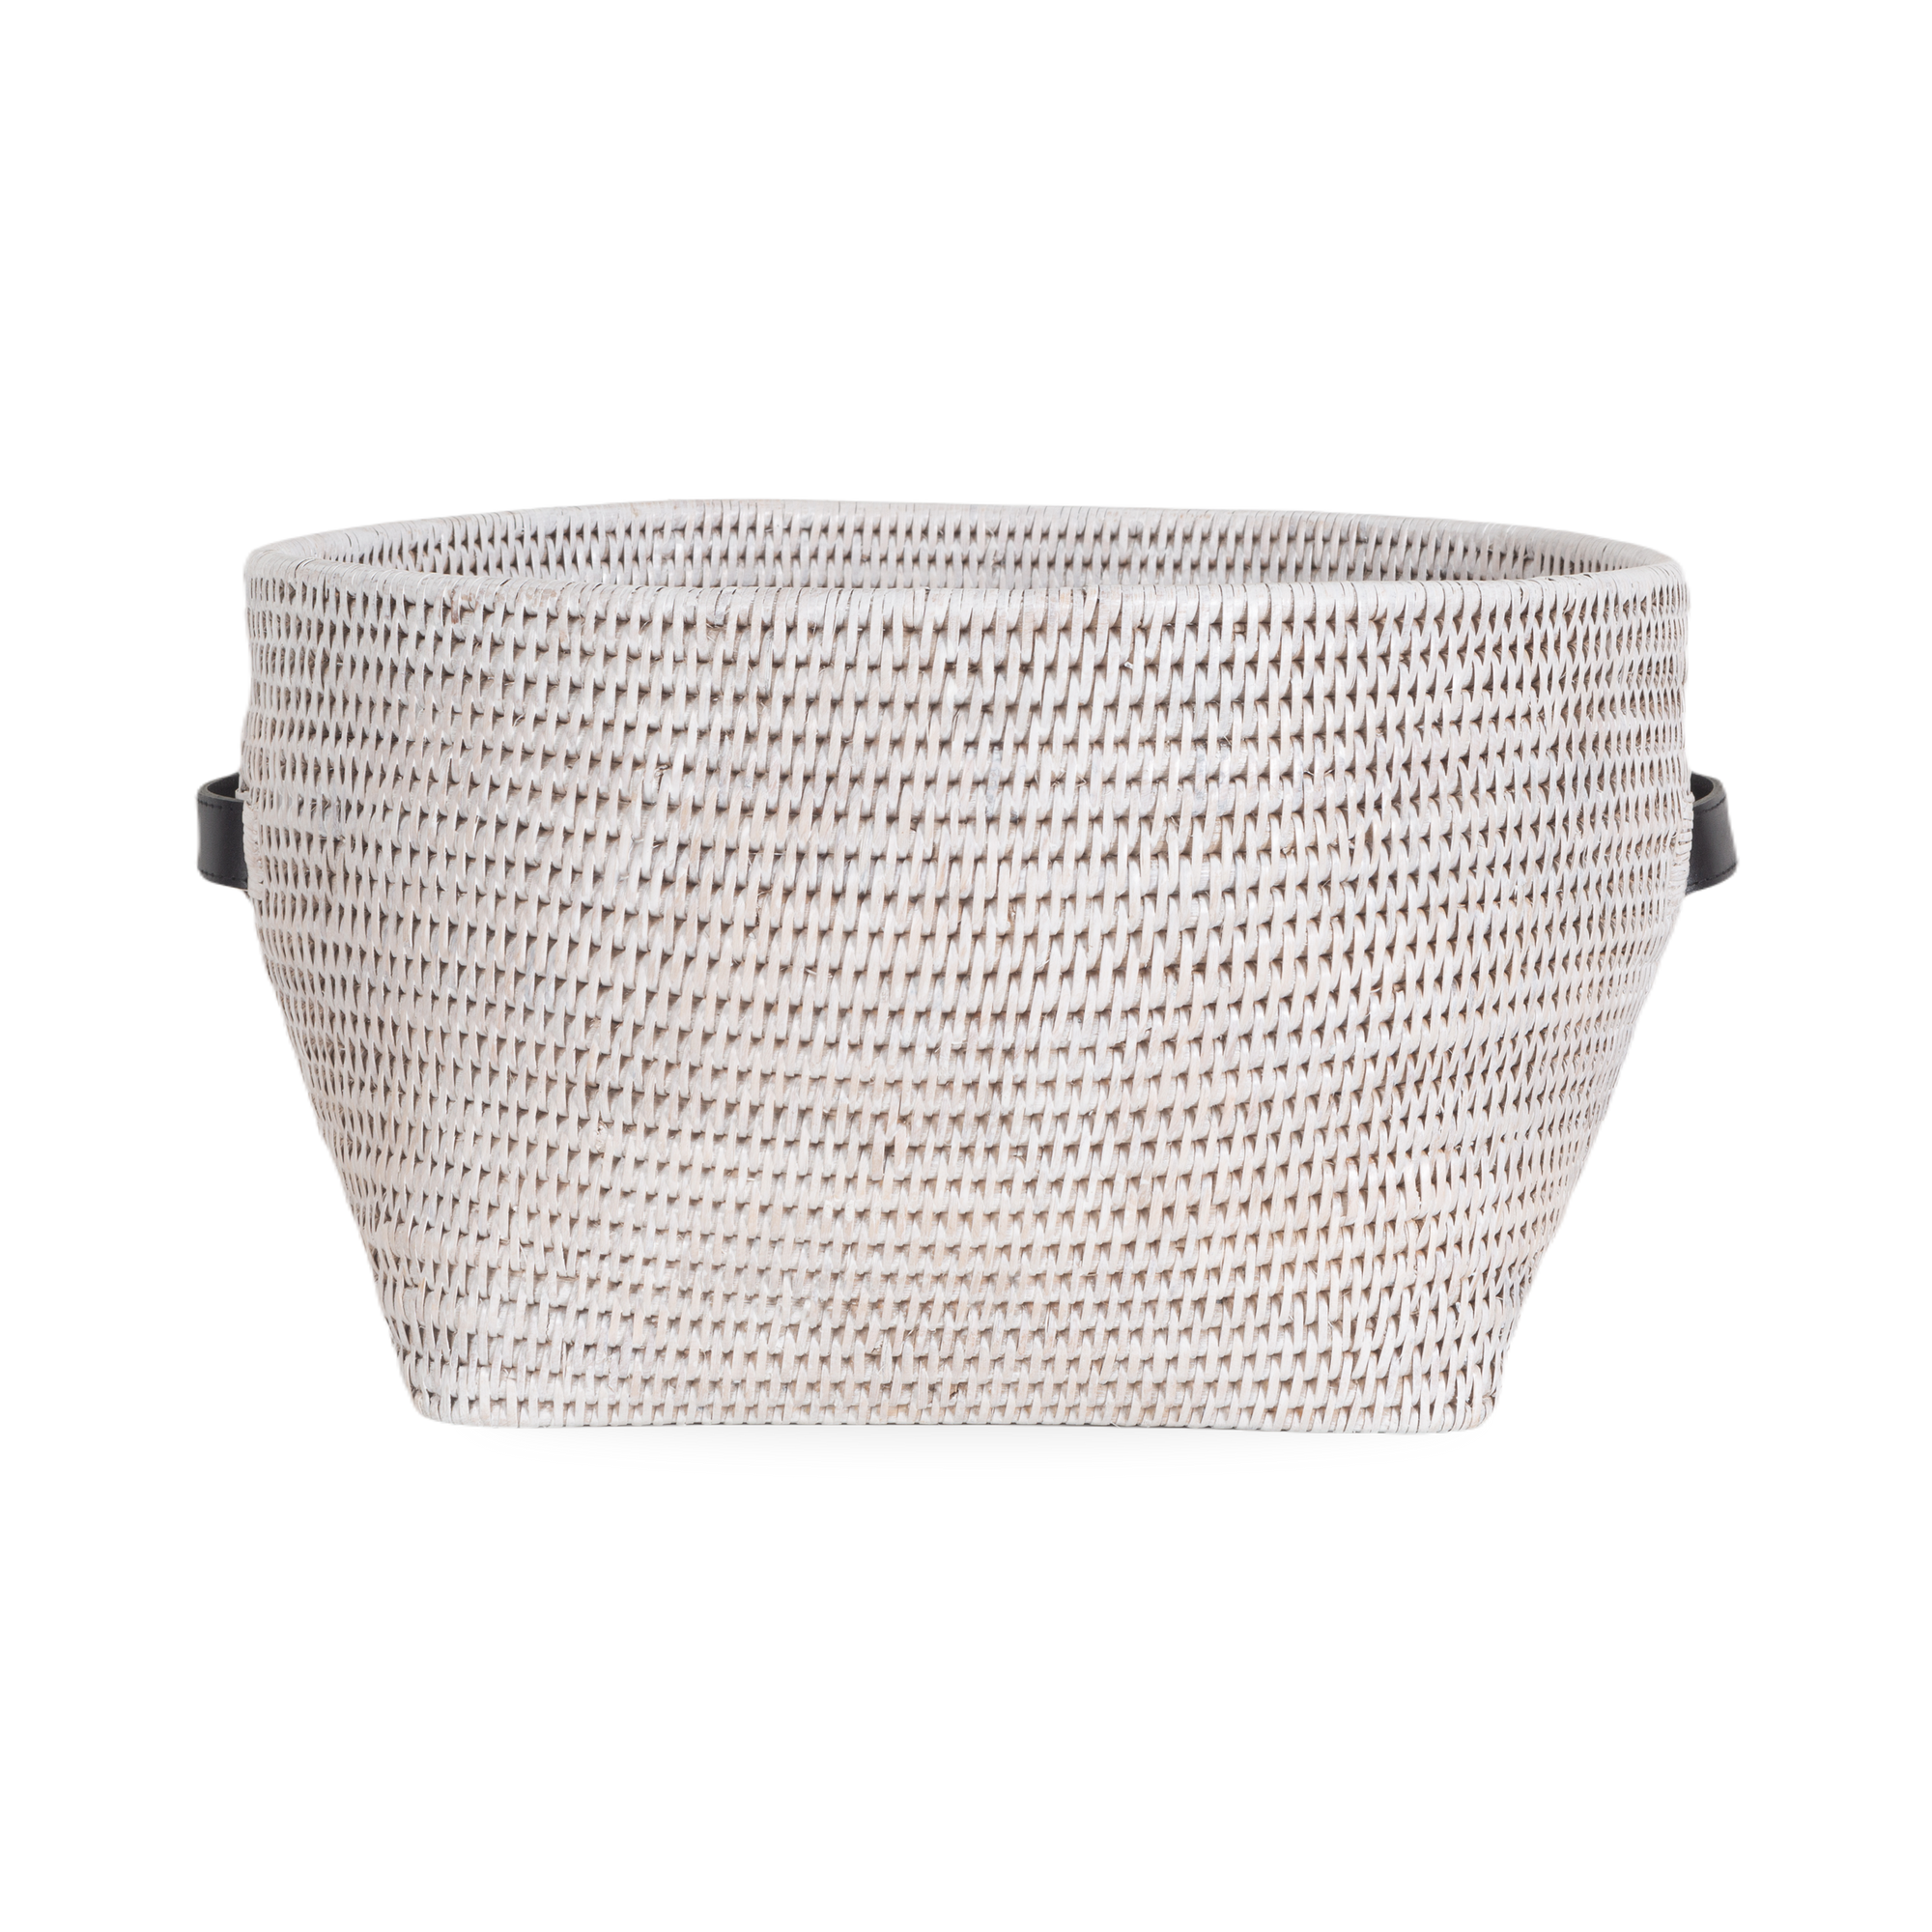 Defined by it's pleasant curves and intricate hand-woven design, the Rattan Low Basket is made with a reliable and durable rattan body which allows this basket to be incredibly ver